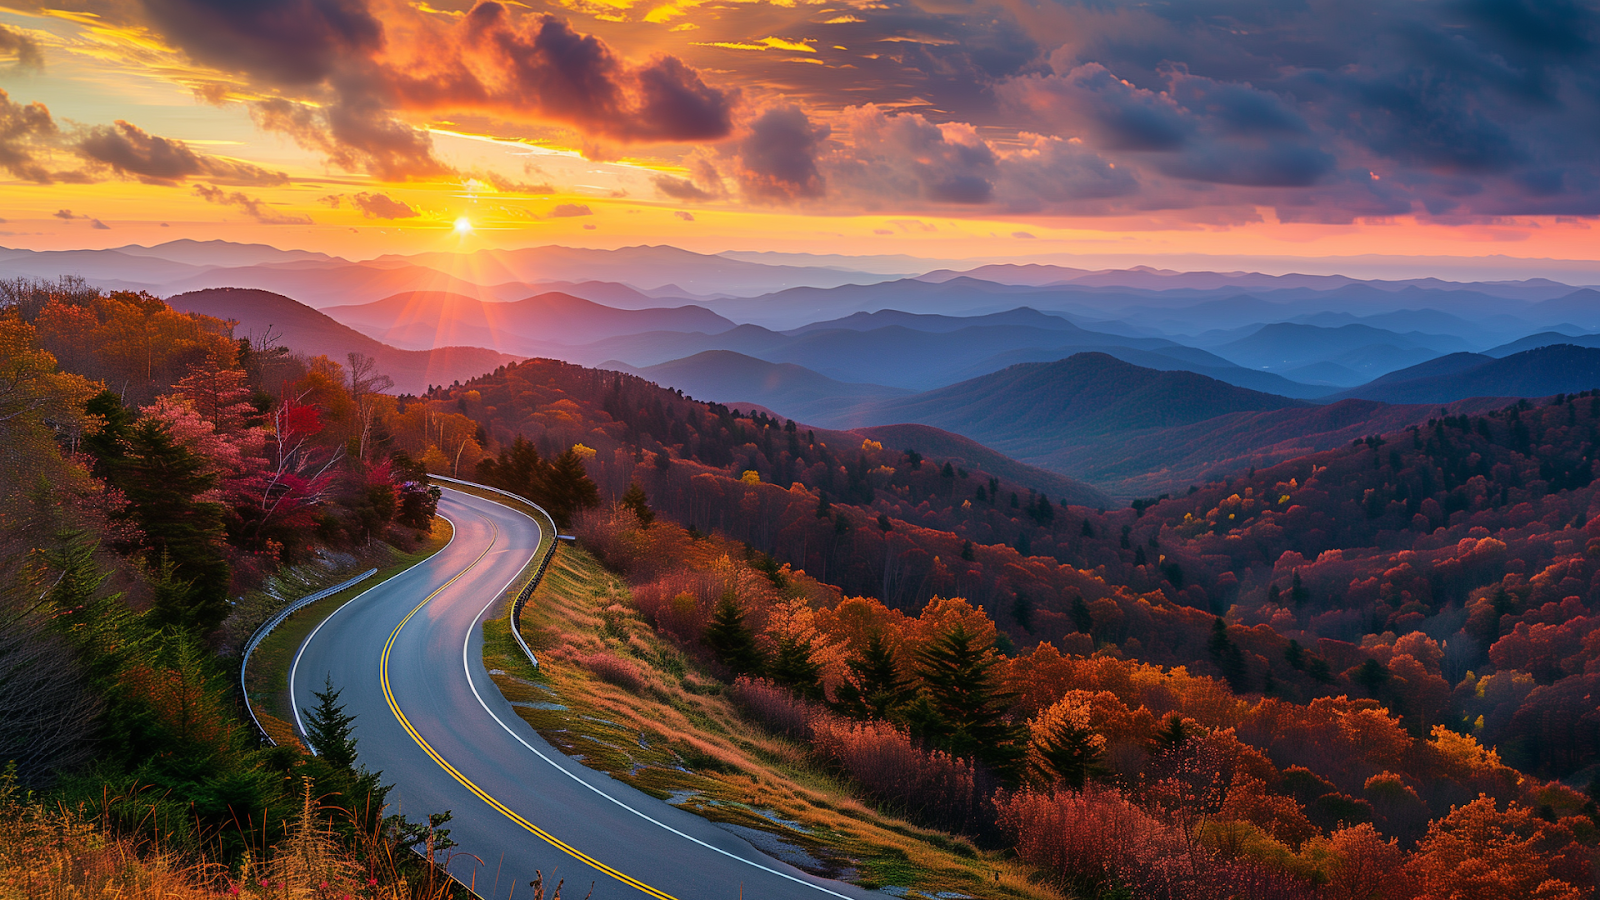 Sunset on the Blue Ridge Parkway in autumn, showcasing the colorful foliage.